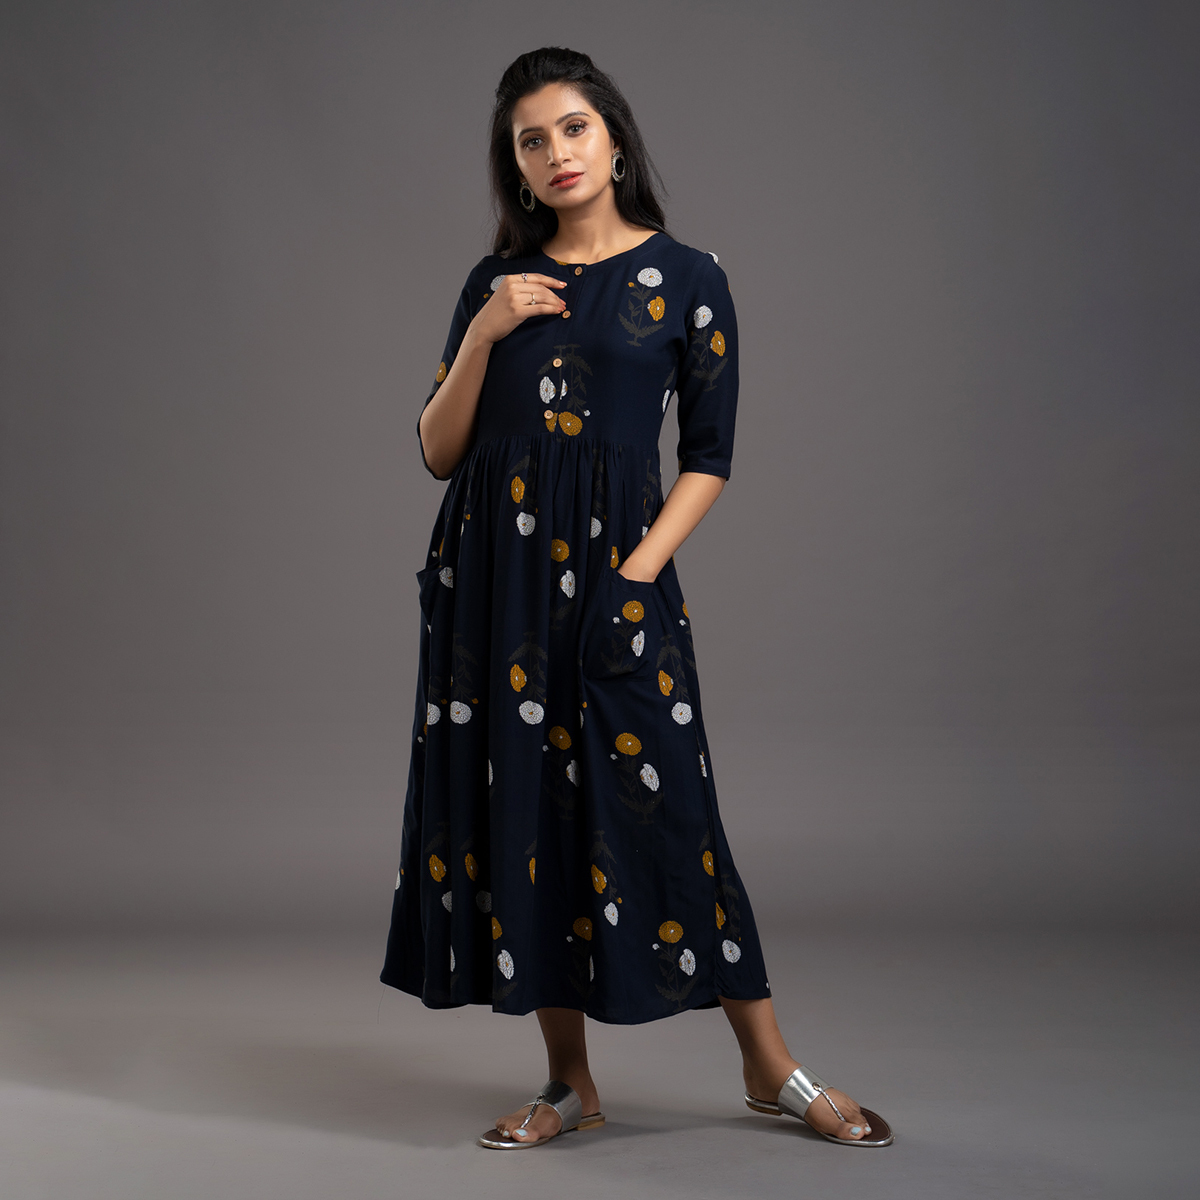 Zella Floral Printed Rayon Midi Dress styled with Patch pockets - Navy Blue